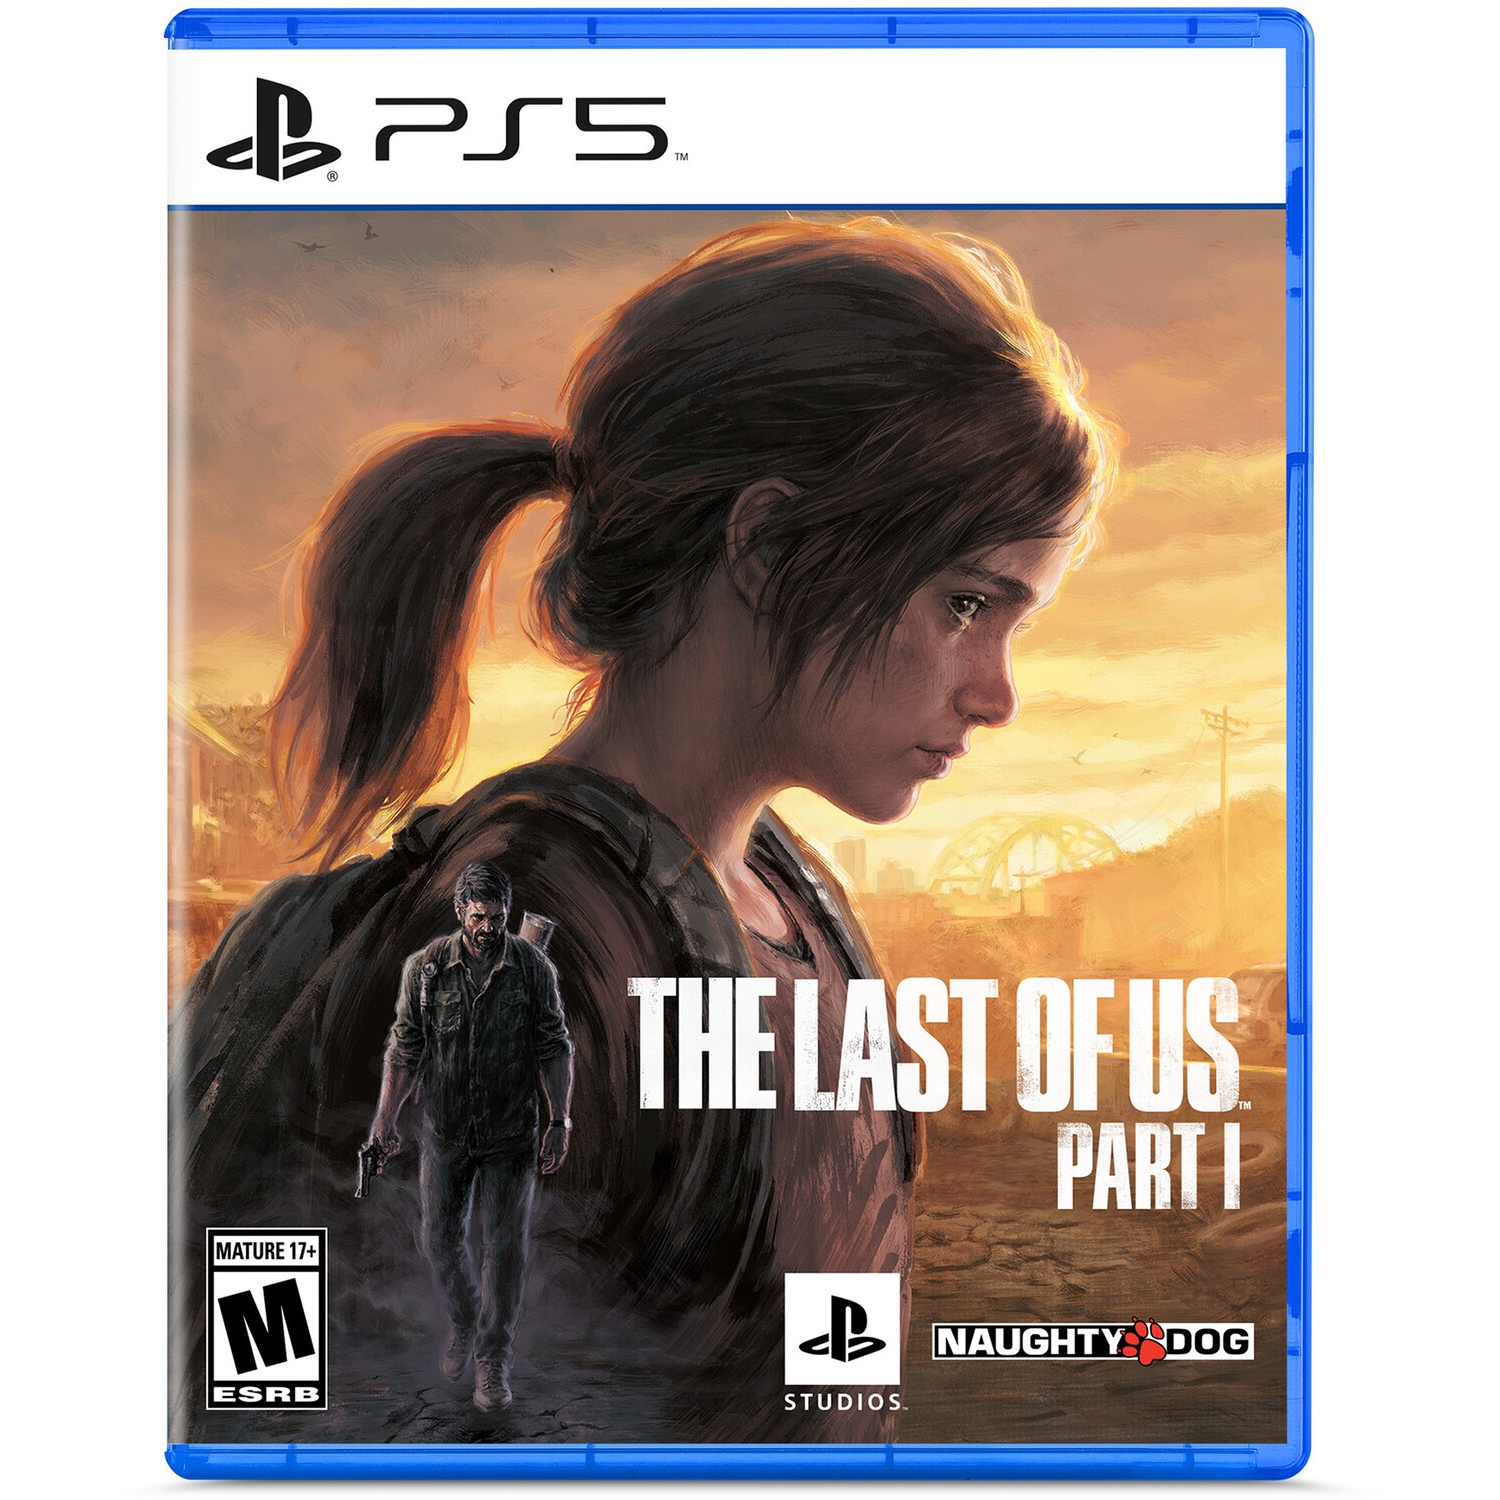 The Last of Us Part I for PlayStation 5 [VIDEOGAMES]